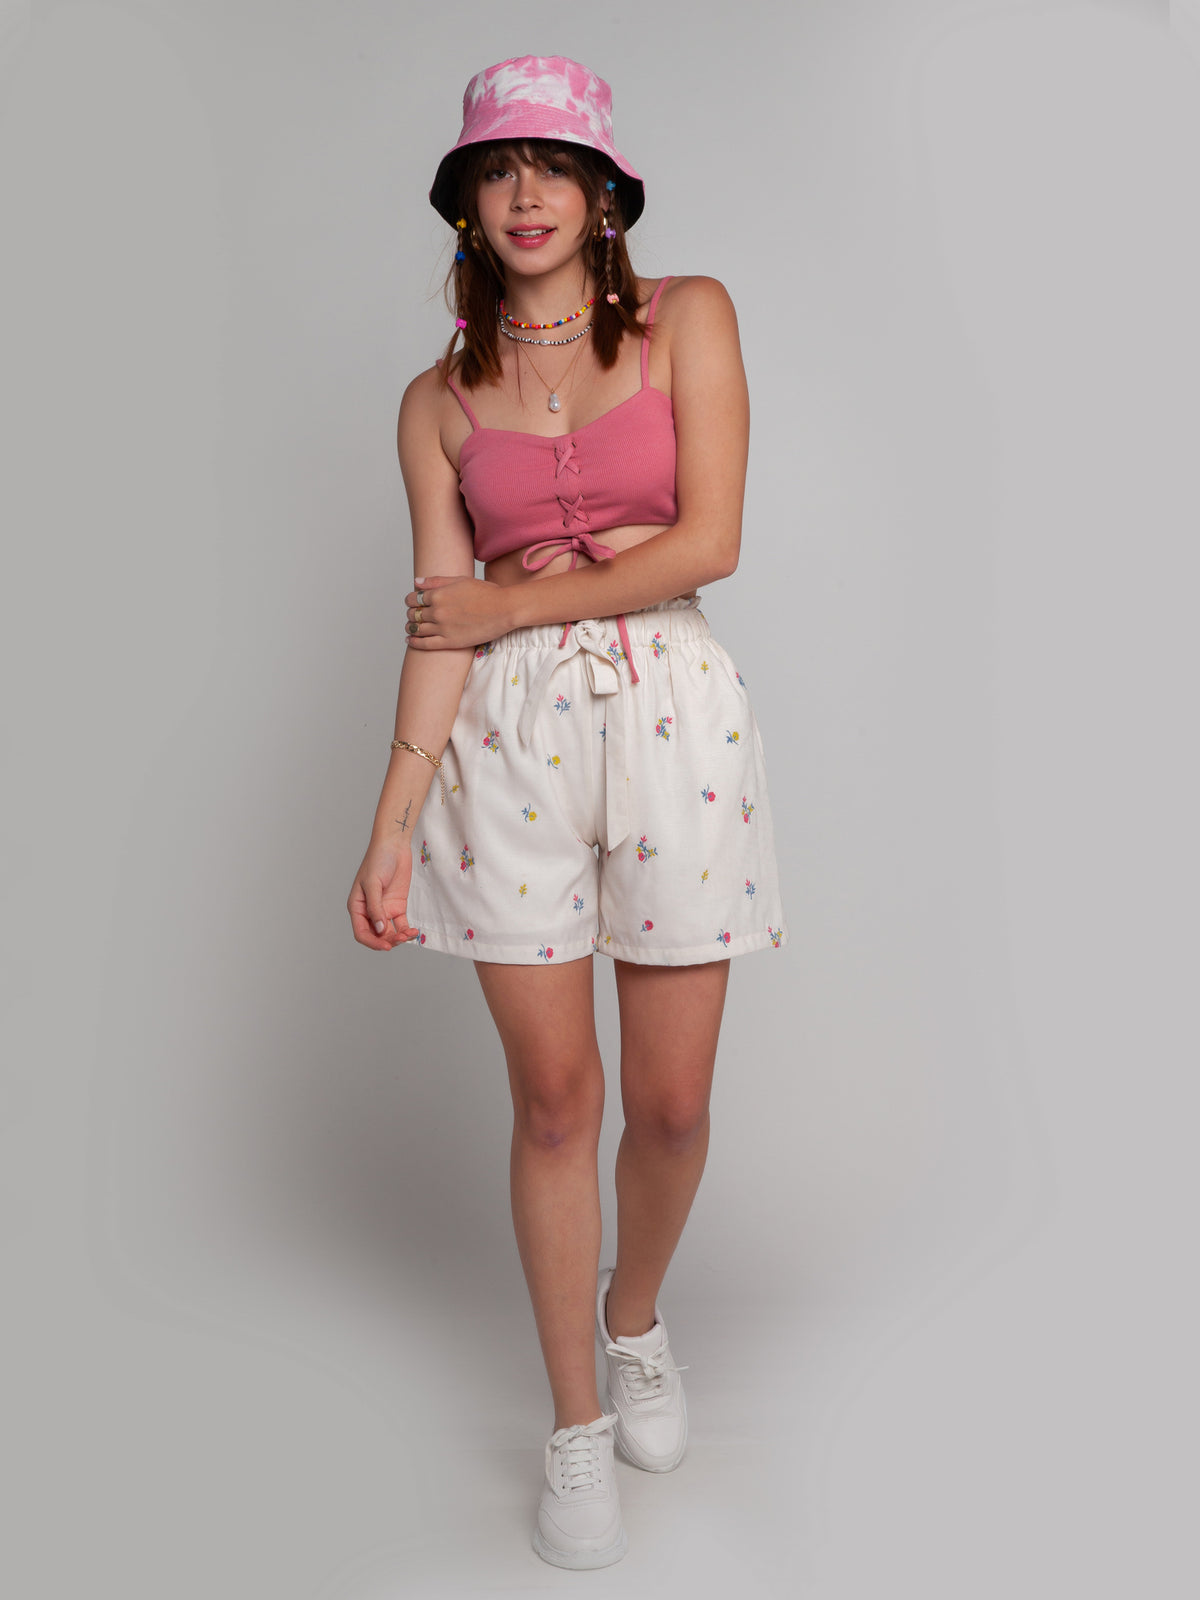 White Embroidered Elasticated Shorts For Women